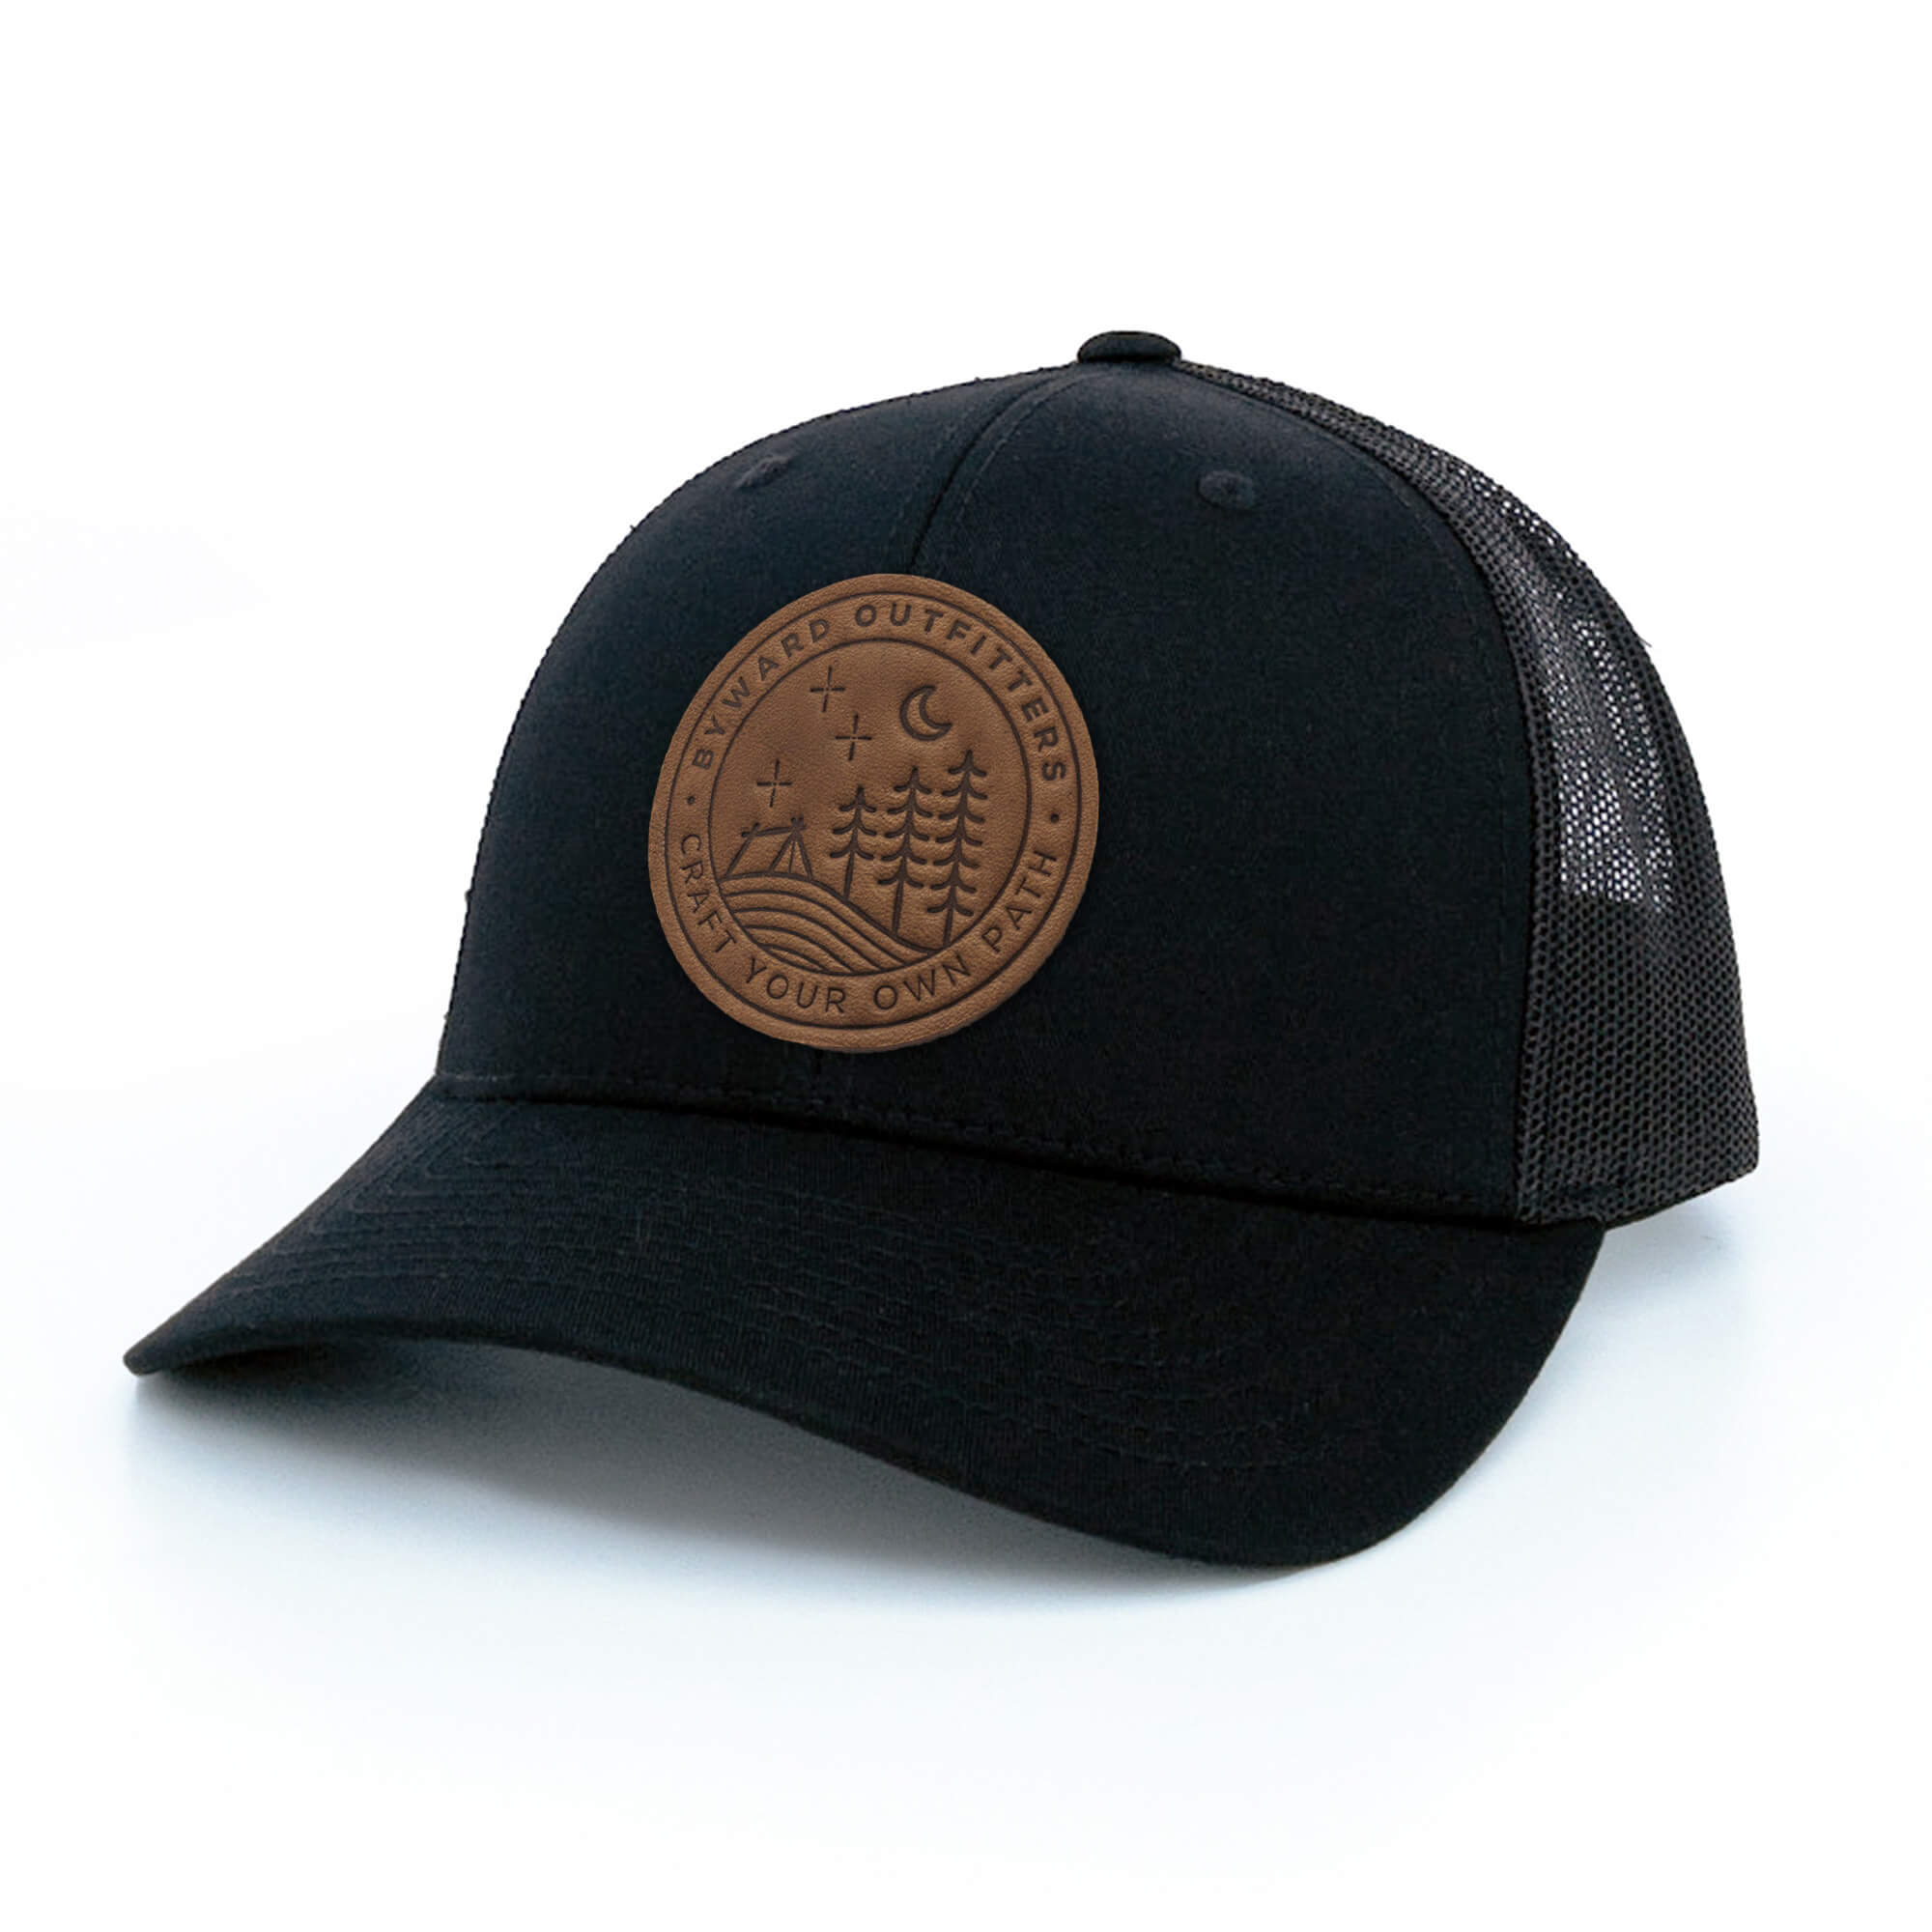 Black trucker hat with full-grain leather patch of Stellar Night | BLACK-005-001, CHARC-005-001, NAVY-005-001, HGREY-005-001, MOSS-005-001, BROWN-005-001  Edit alt text